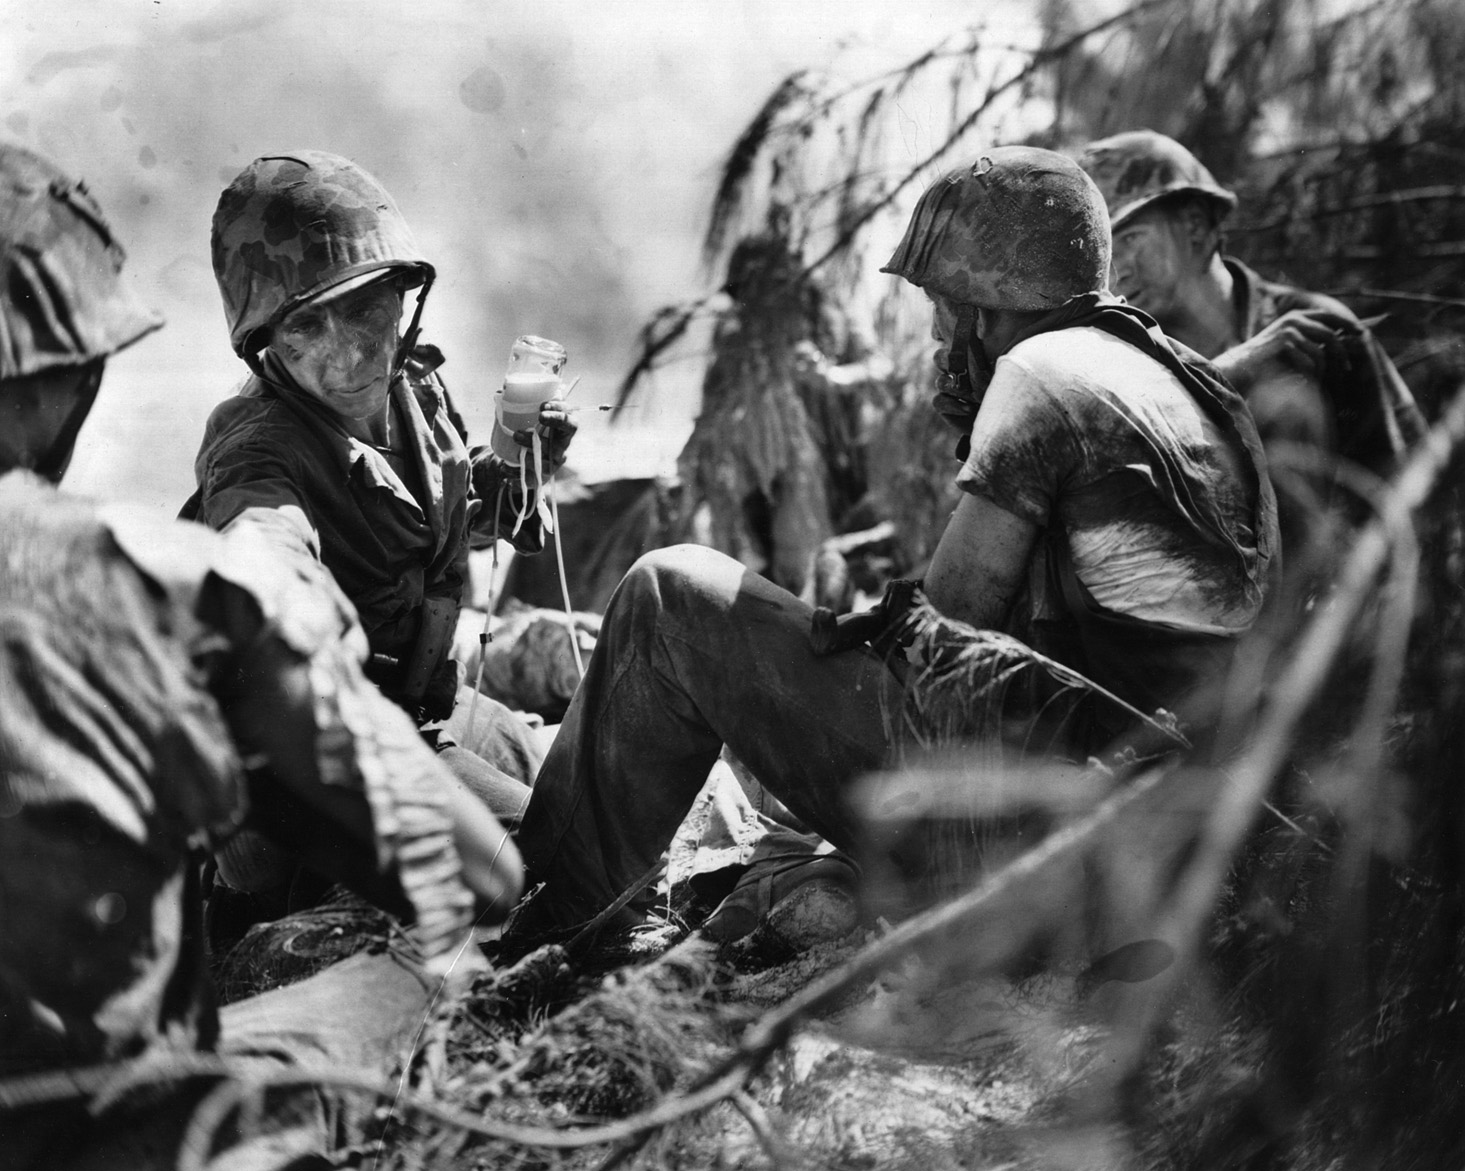  A Navy corpsman administers aid to wounded Marines of the 3rd Battalion, 24th Marines.